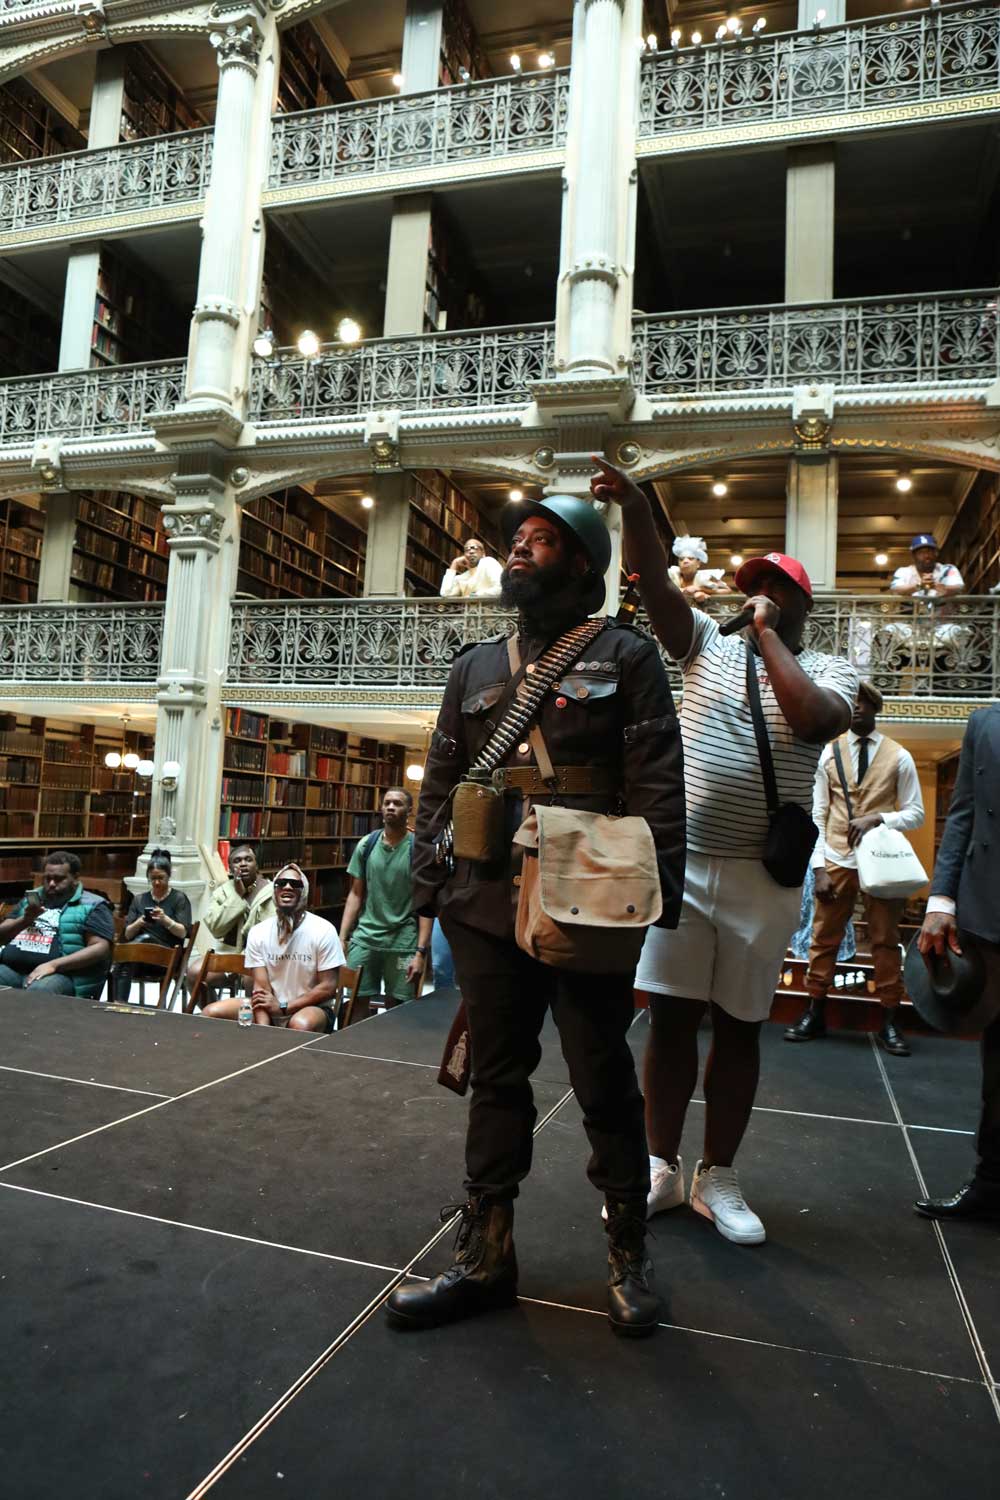 A performer on the stage at the George Peabody Library